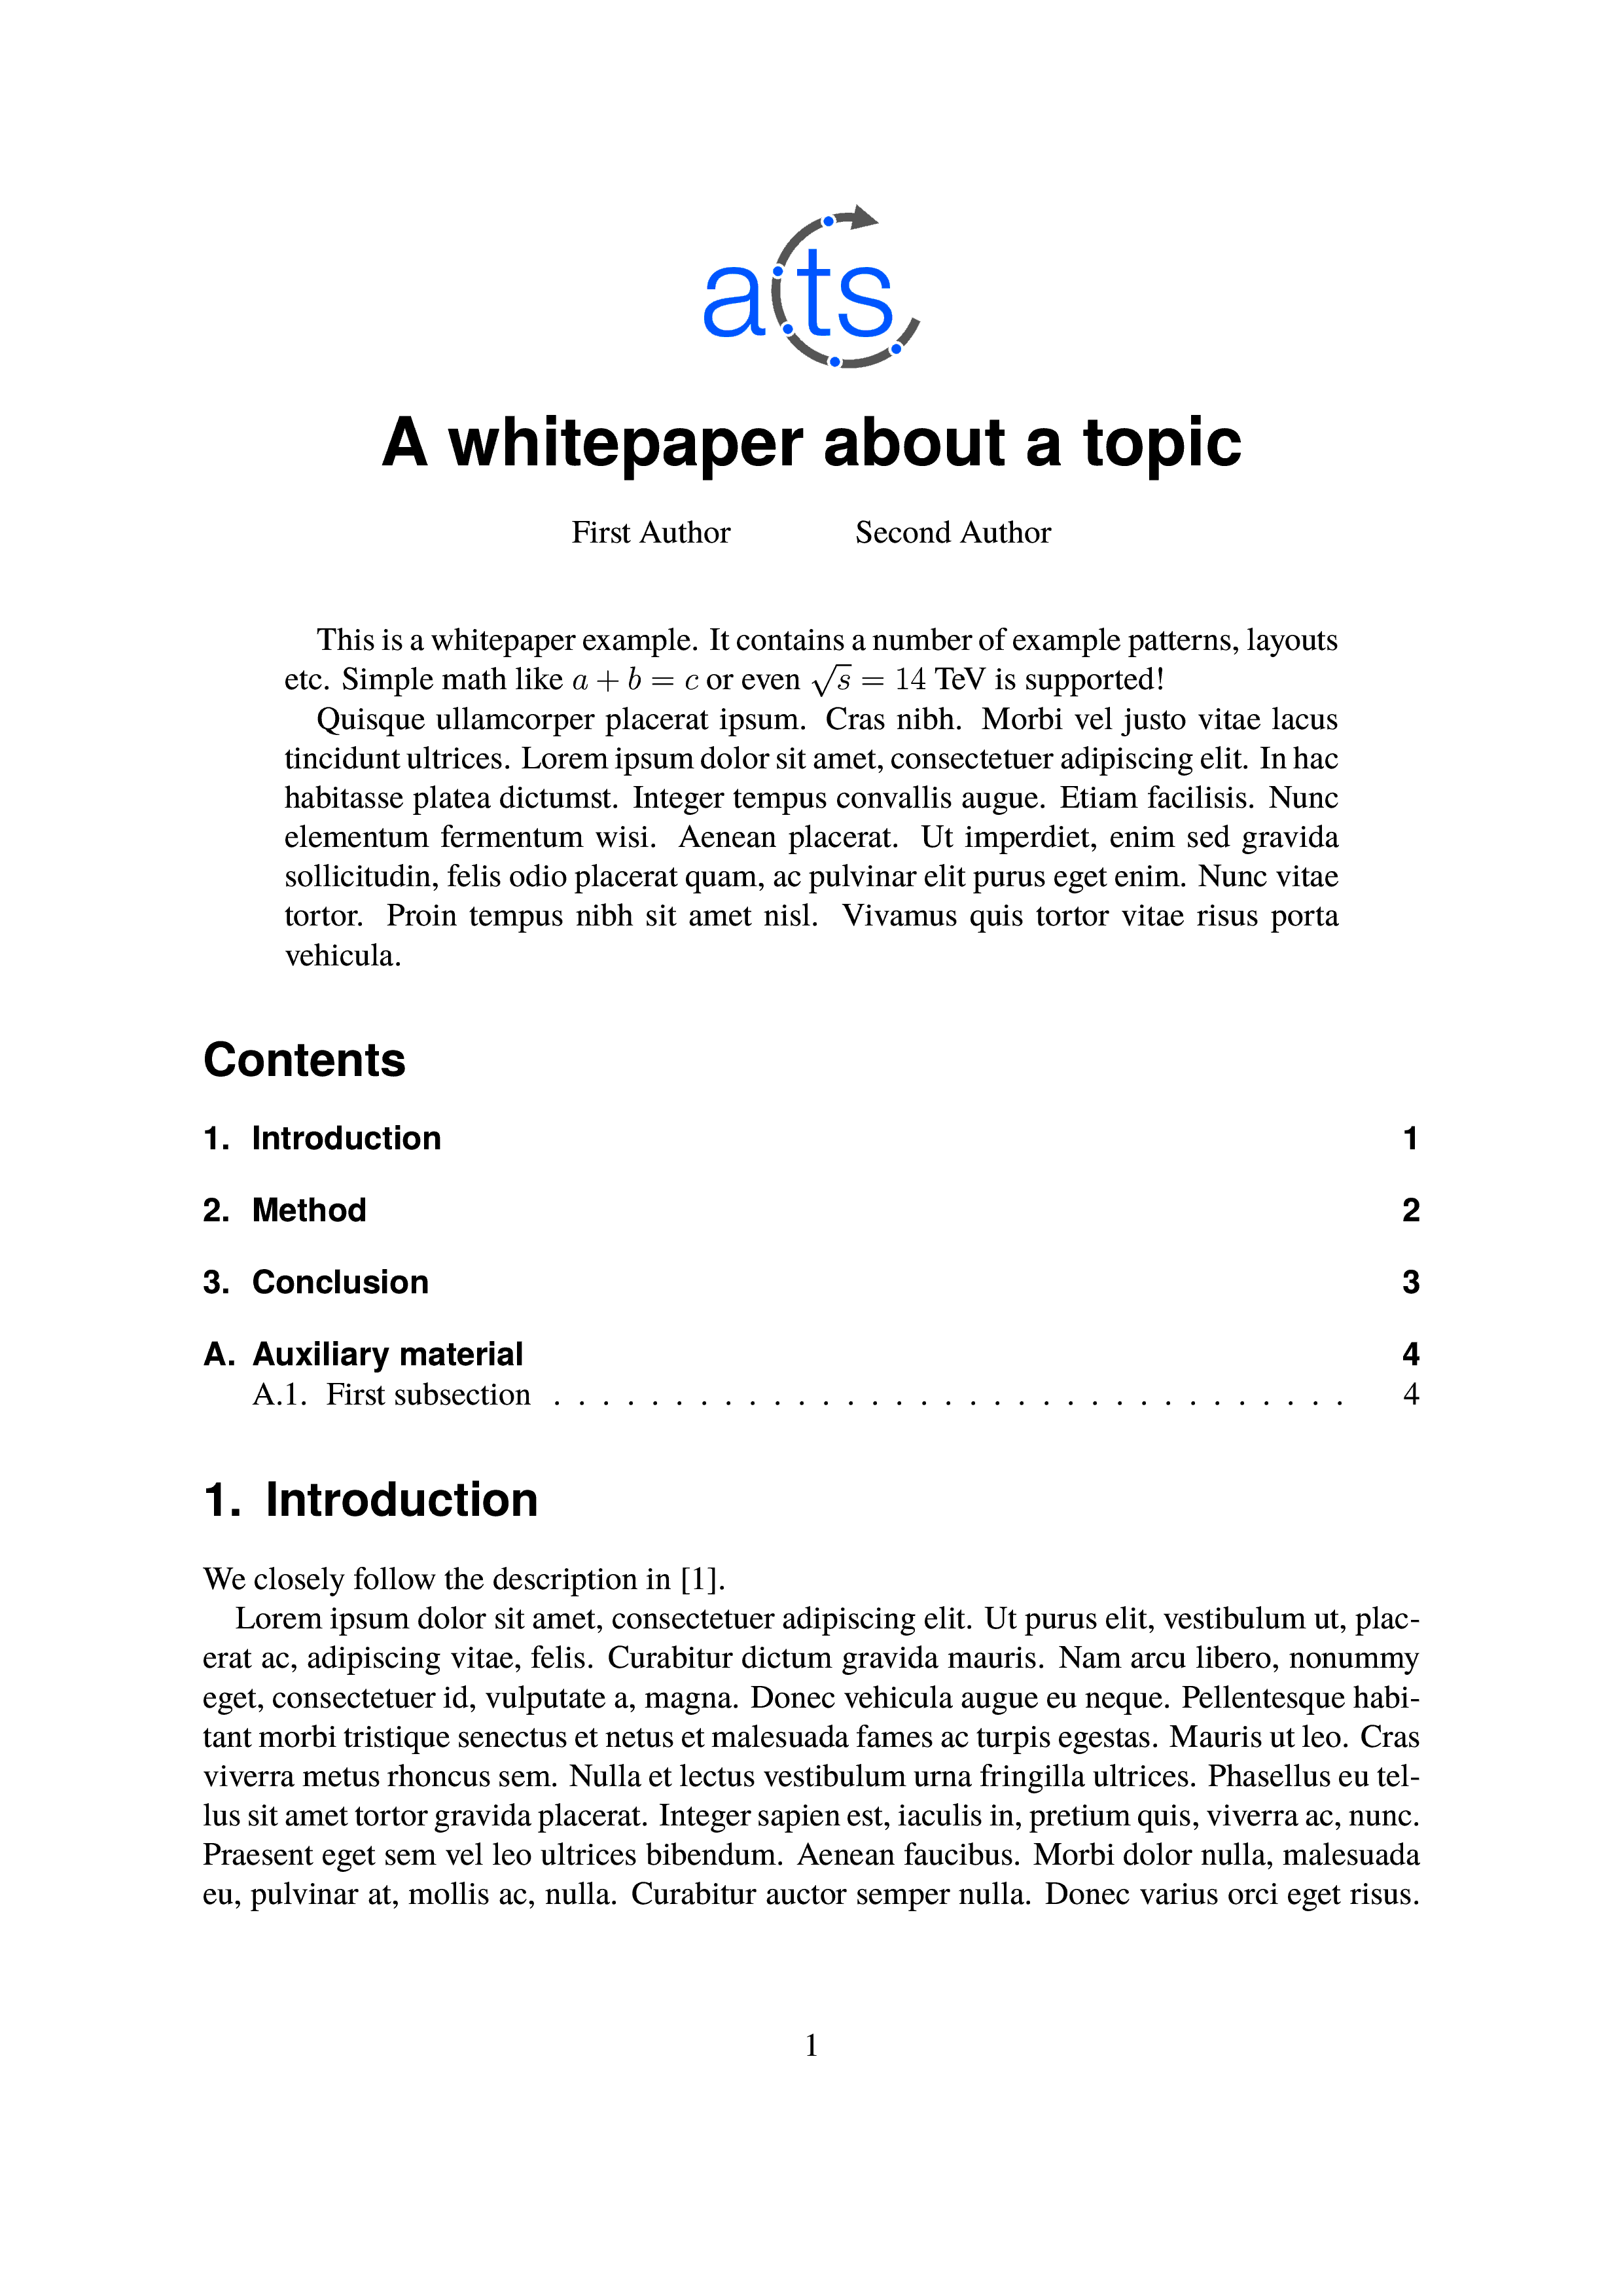 ../_images/whitepaper-template.png